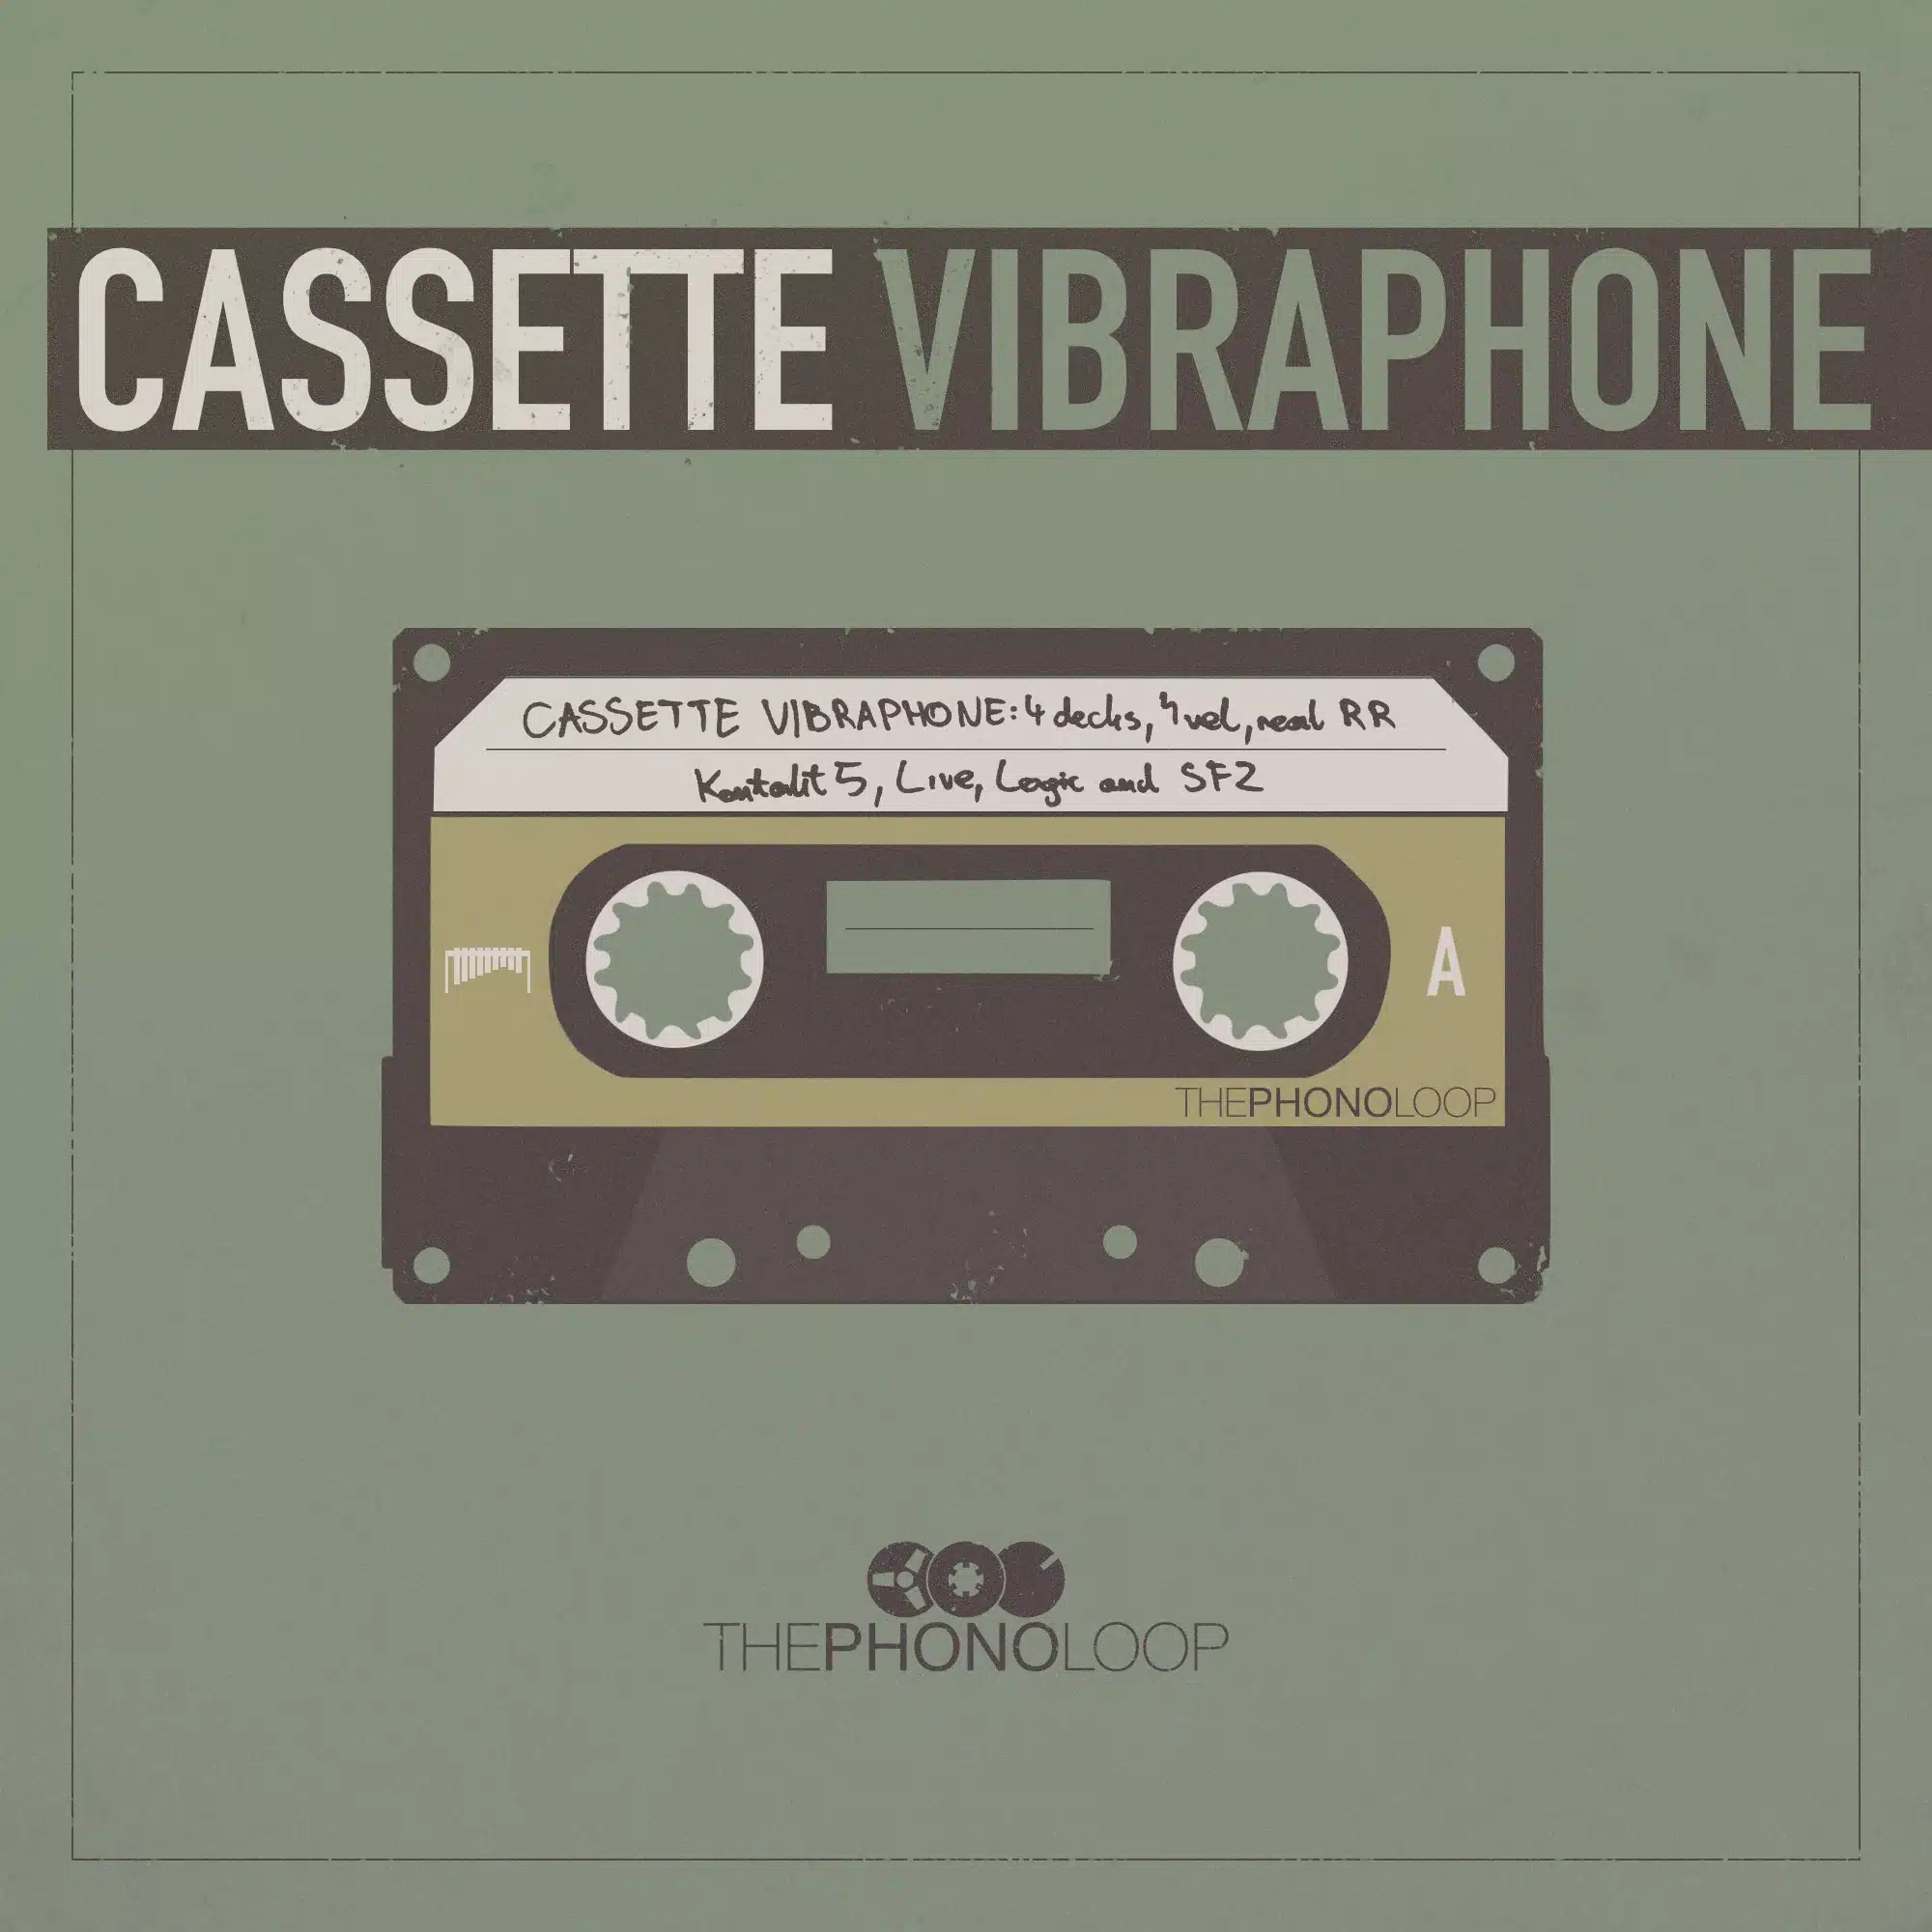 72% off “Cassette Vibraphone” by THEPHONOLOOP